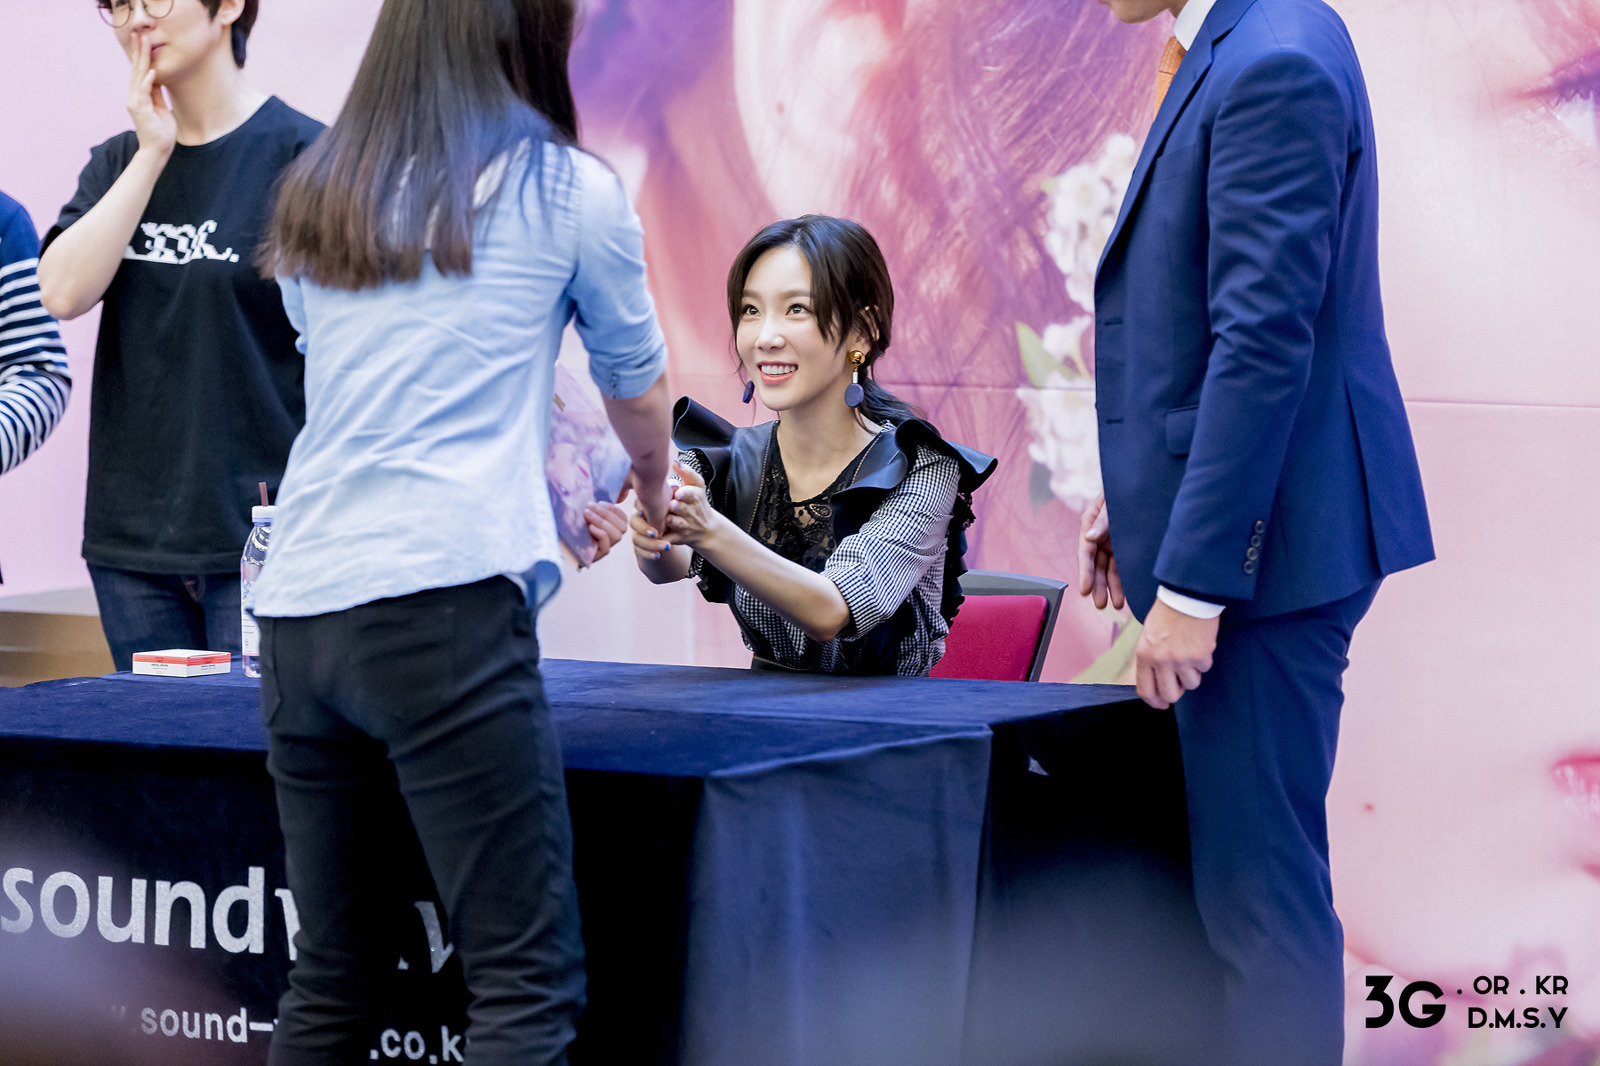 [PIC][16-04-2017]TaeYeon tham dự buổi Fansign cho “MY VOICE DELUXE EDITION” tại AK PLAZA vào chiều nay  - Page 5 2367DC3D58FDD8CE022A8A